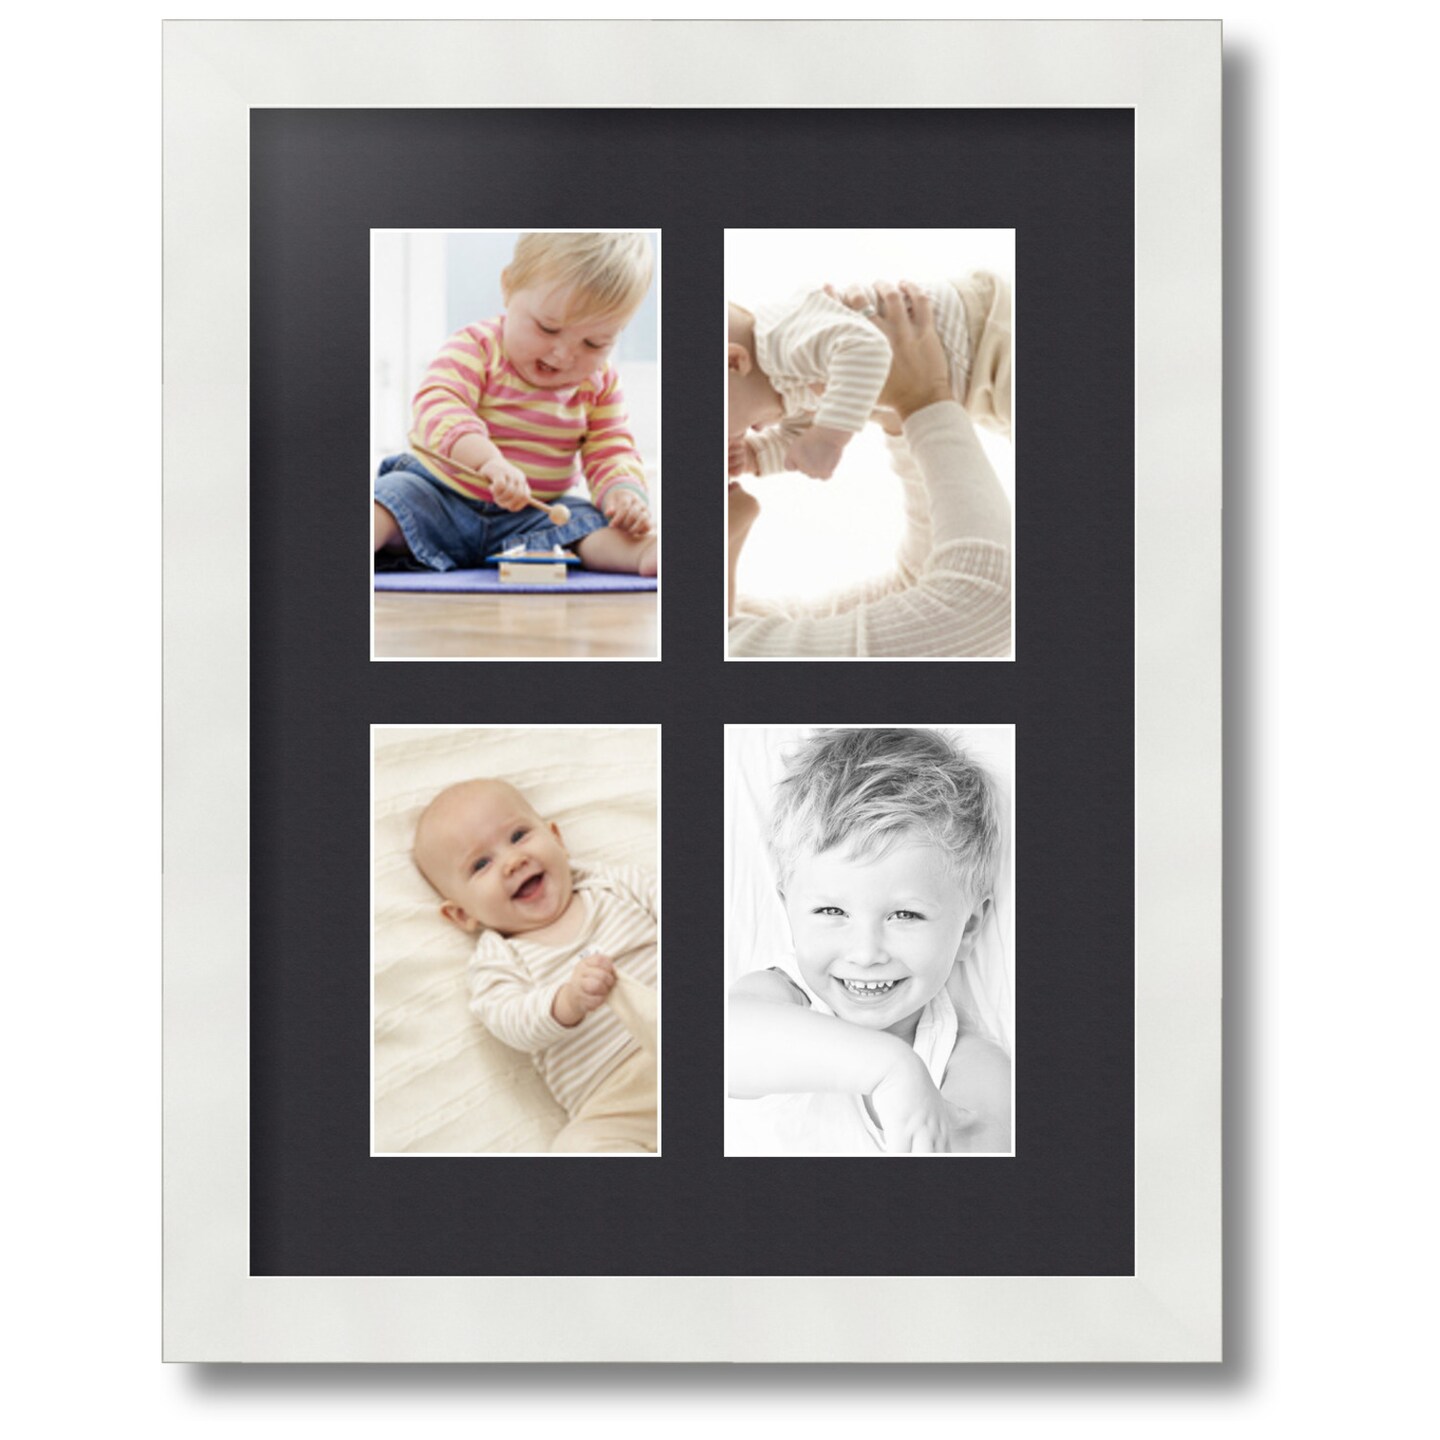 ArtToFrames Collage Photo Picture Frame with 4 - 4x6 inch Openings, Framed in White with Over 62 Mat Color Options and Regular Glass (CSM-3966-2)